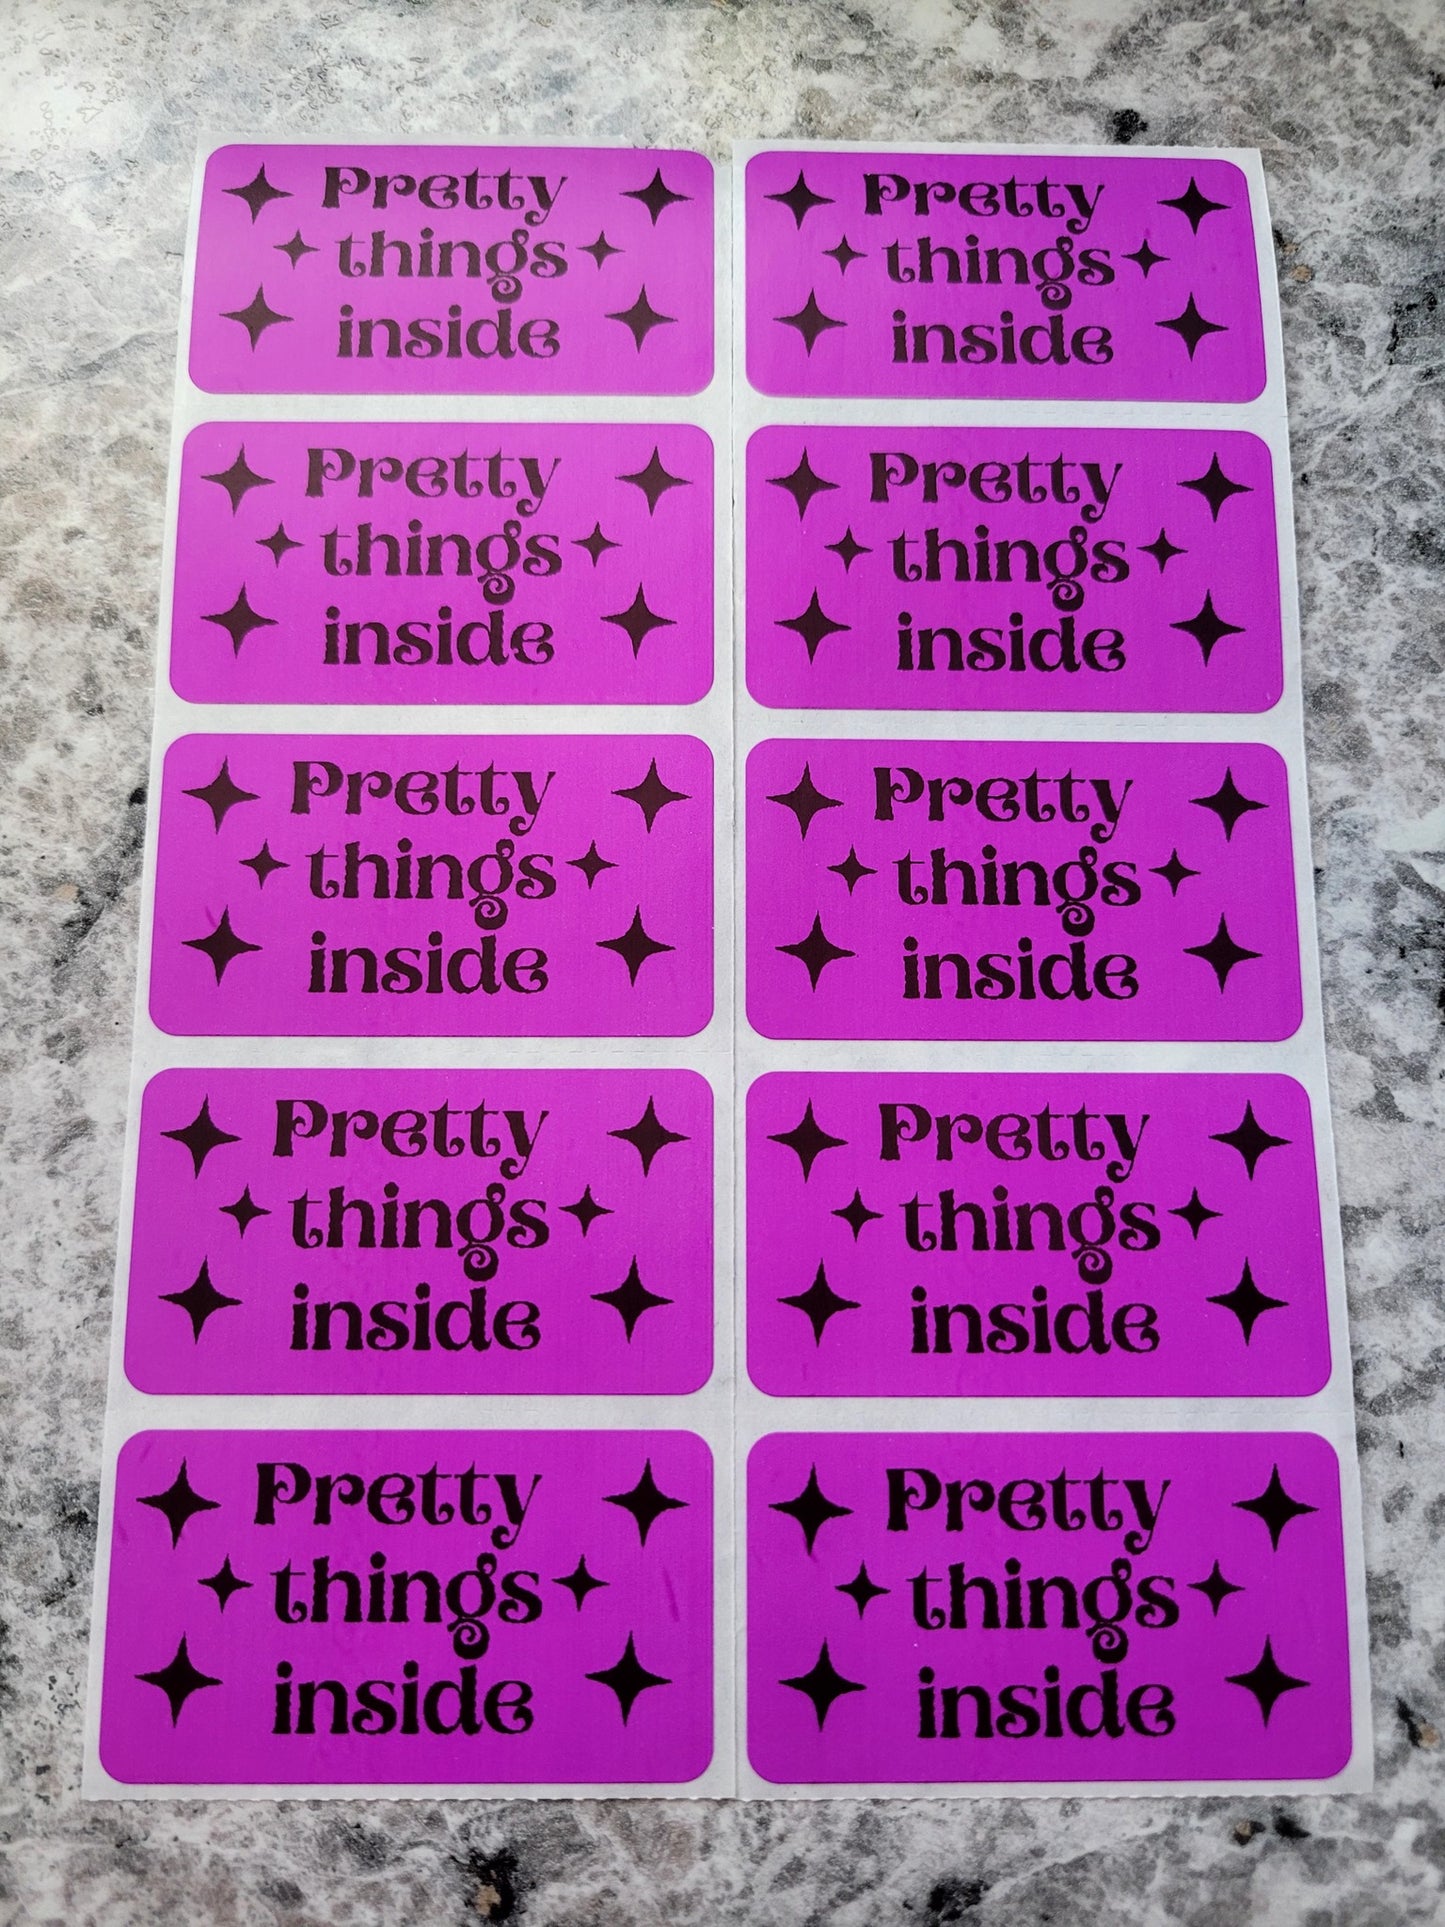 Pretty things inside 50 OR 100 count